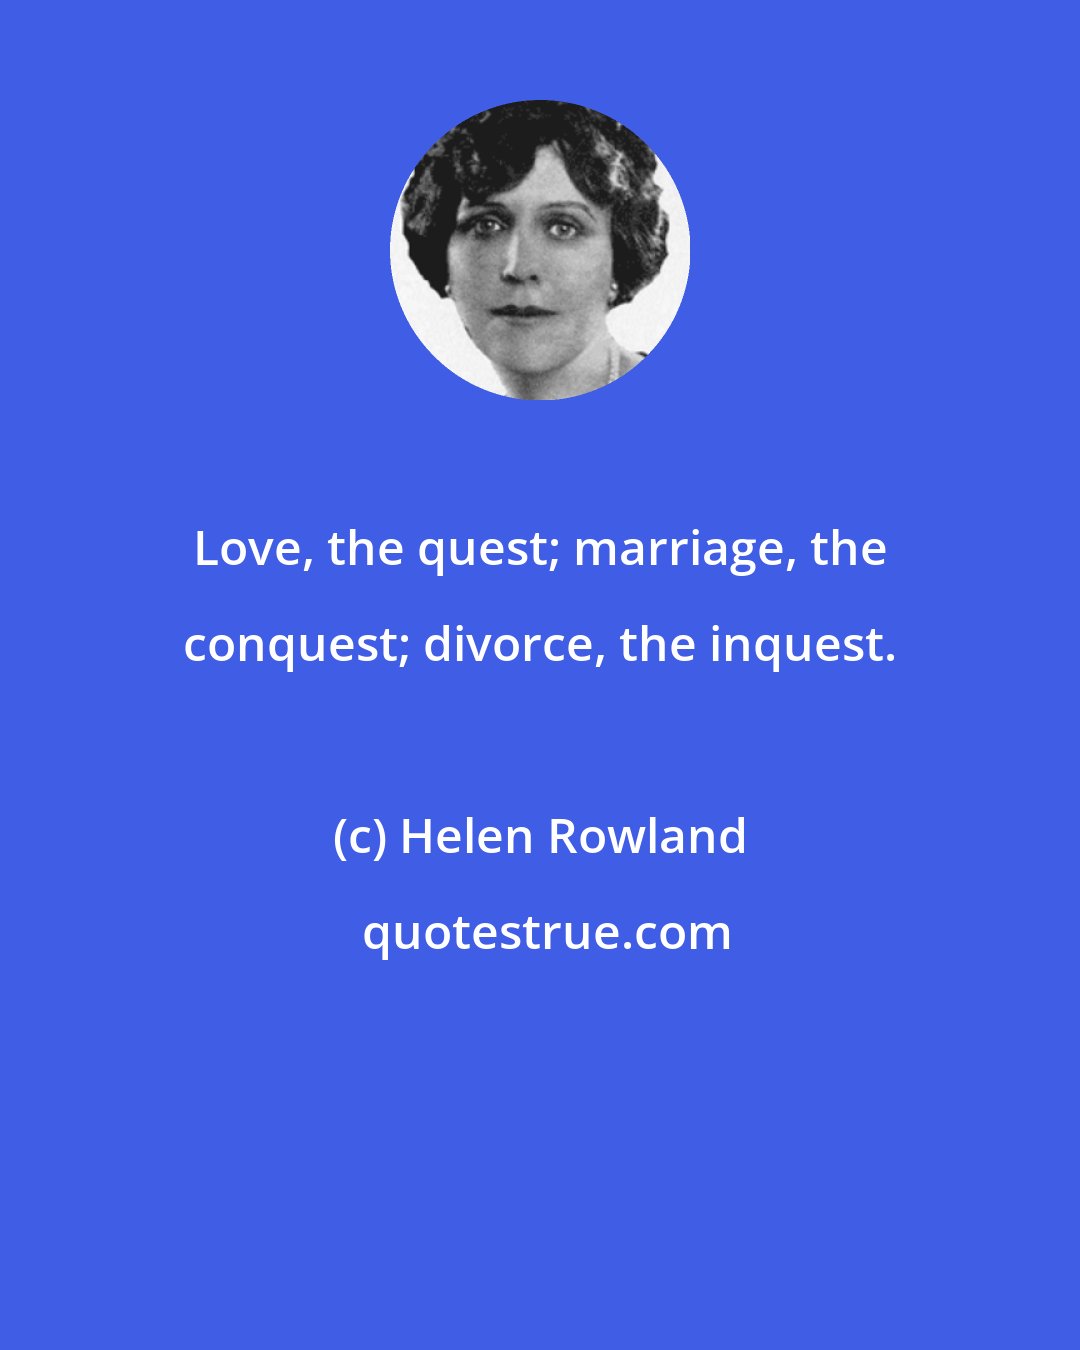 Helen Rowland: Love, the quest; marriage, the conquest; divorce, the inquest.